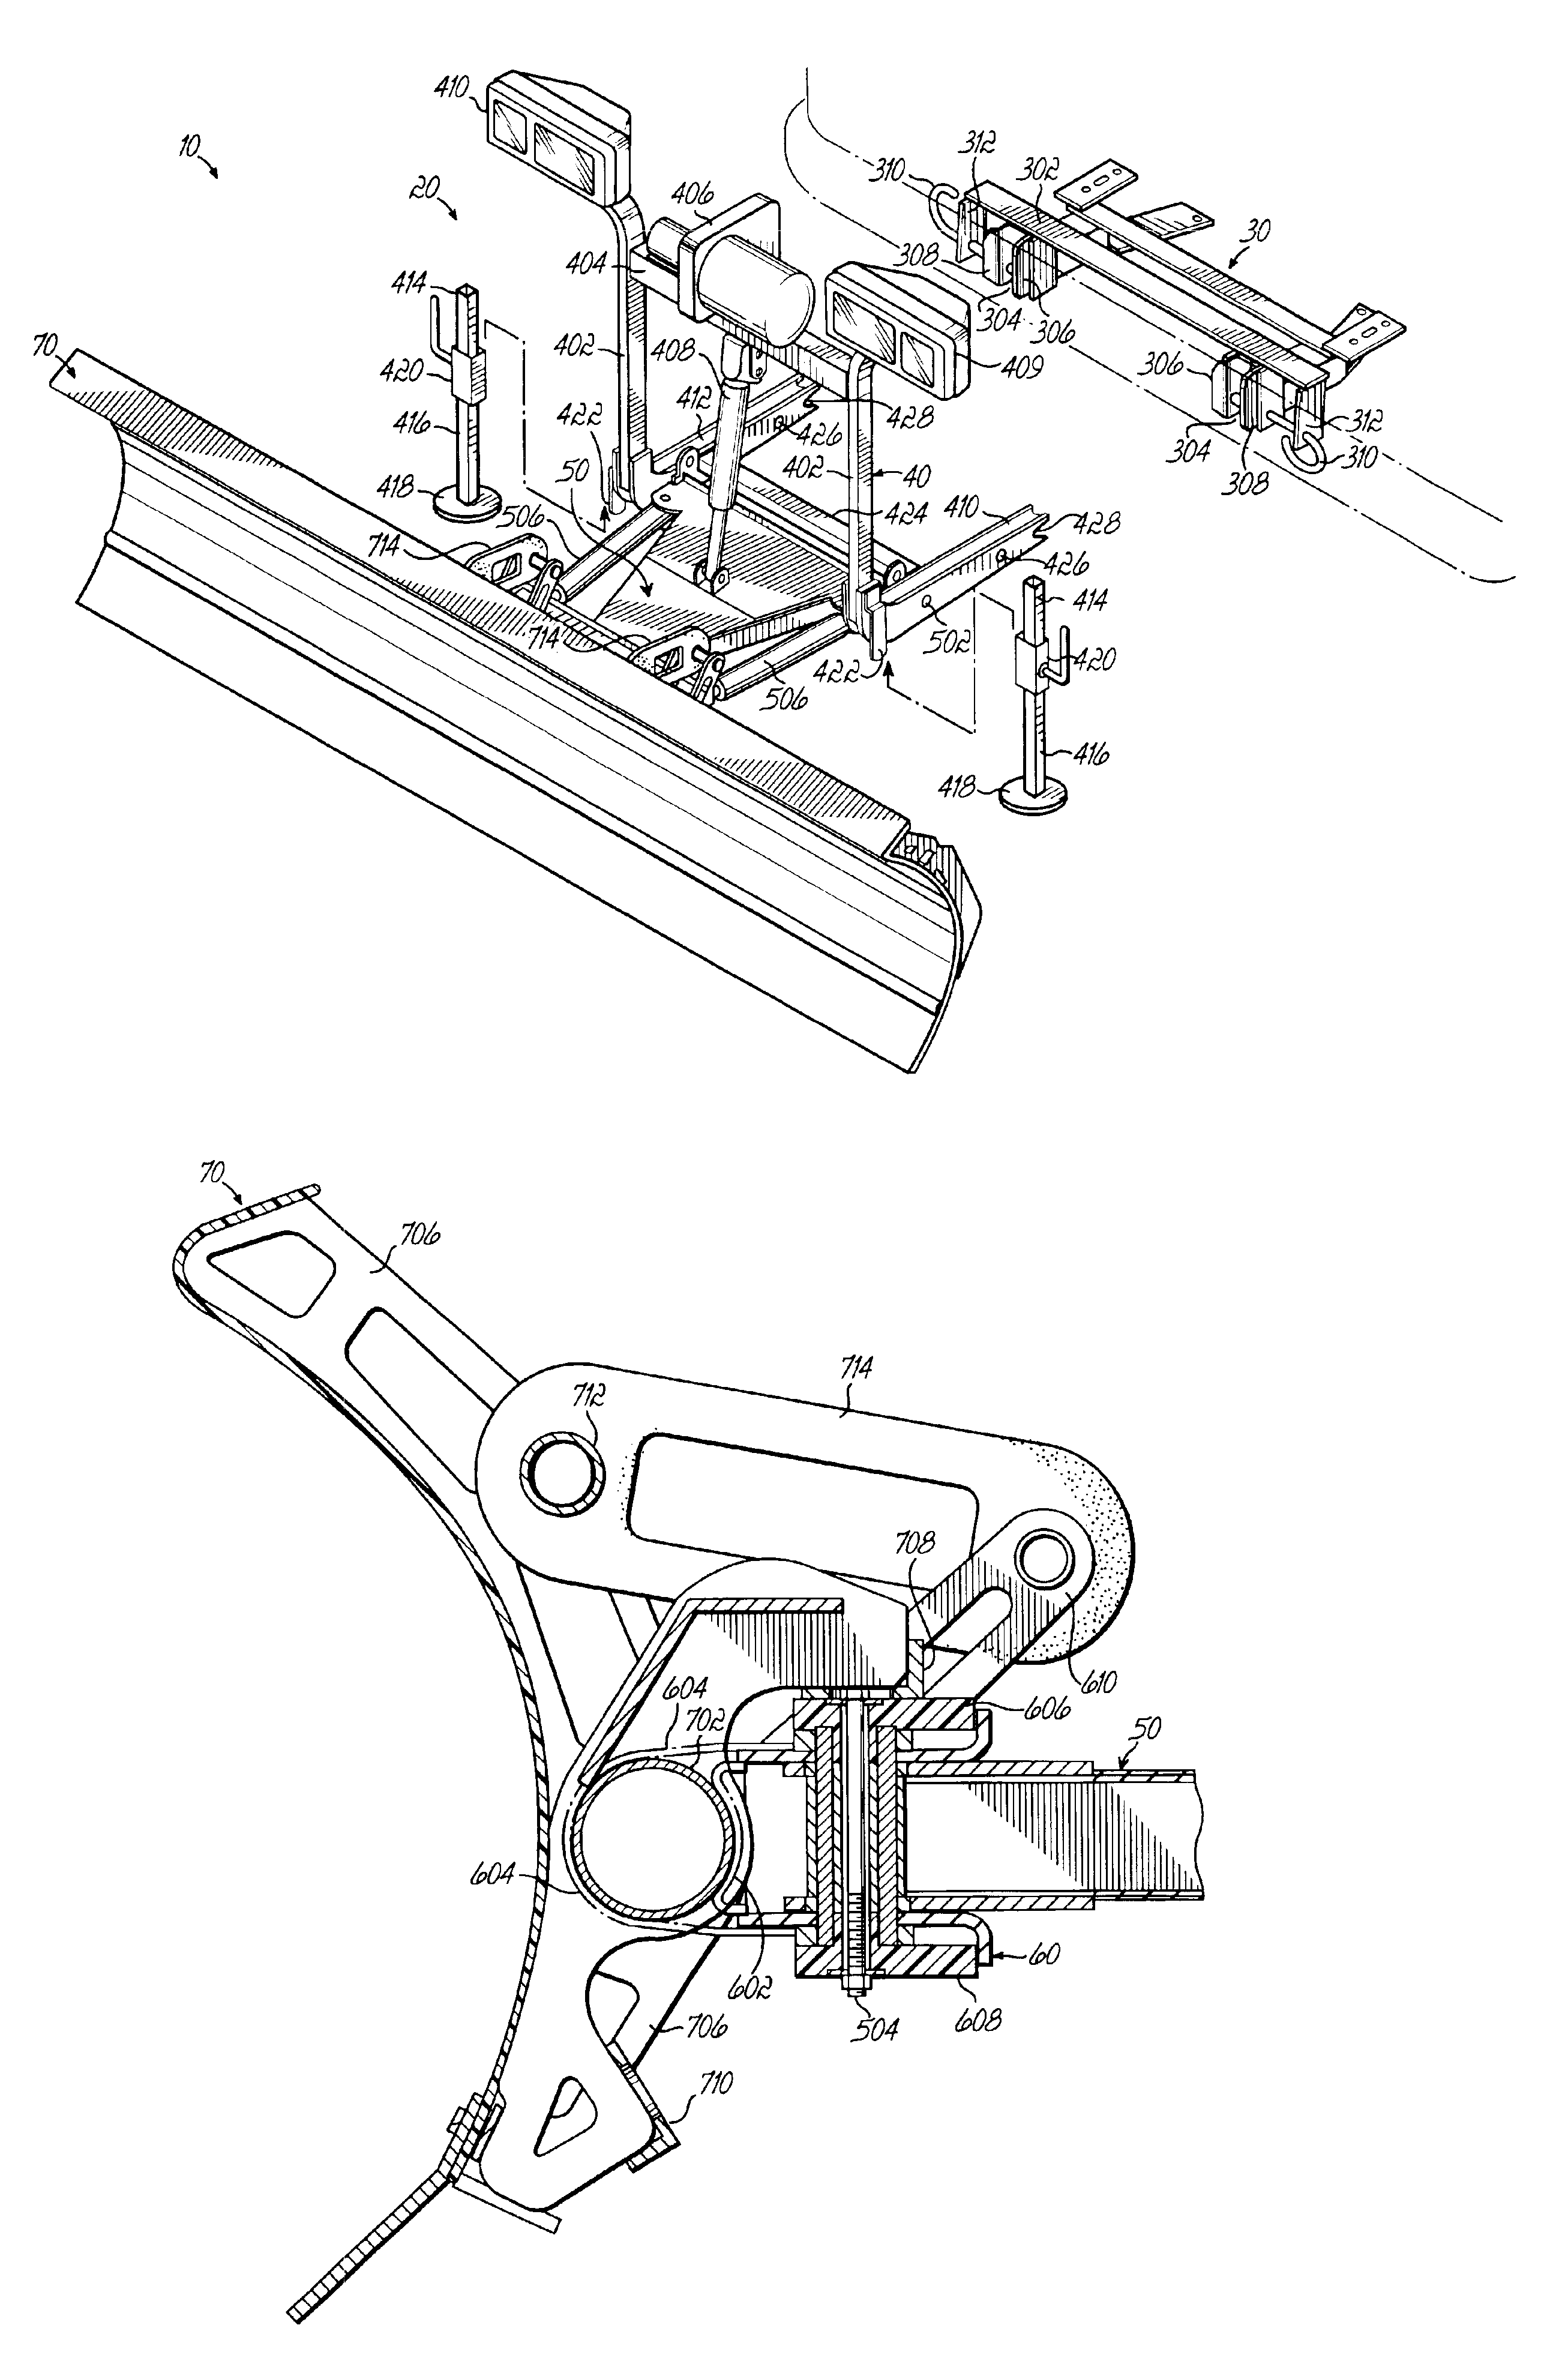 Snowplow assembly